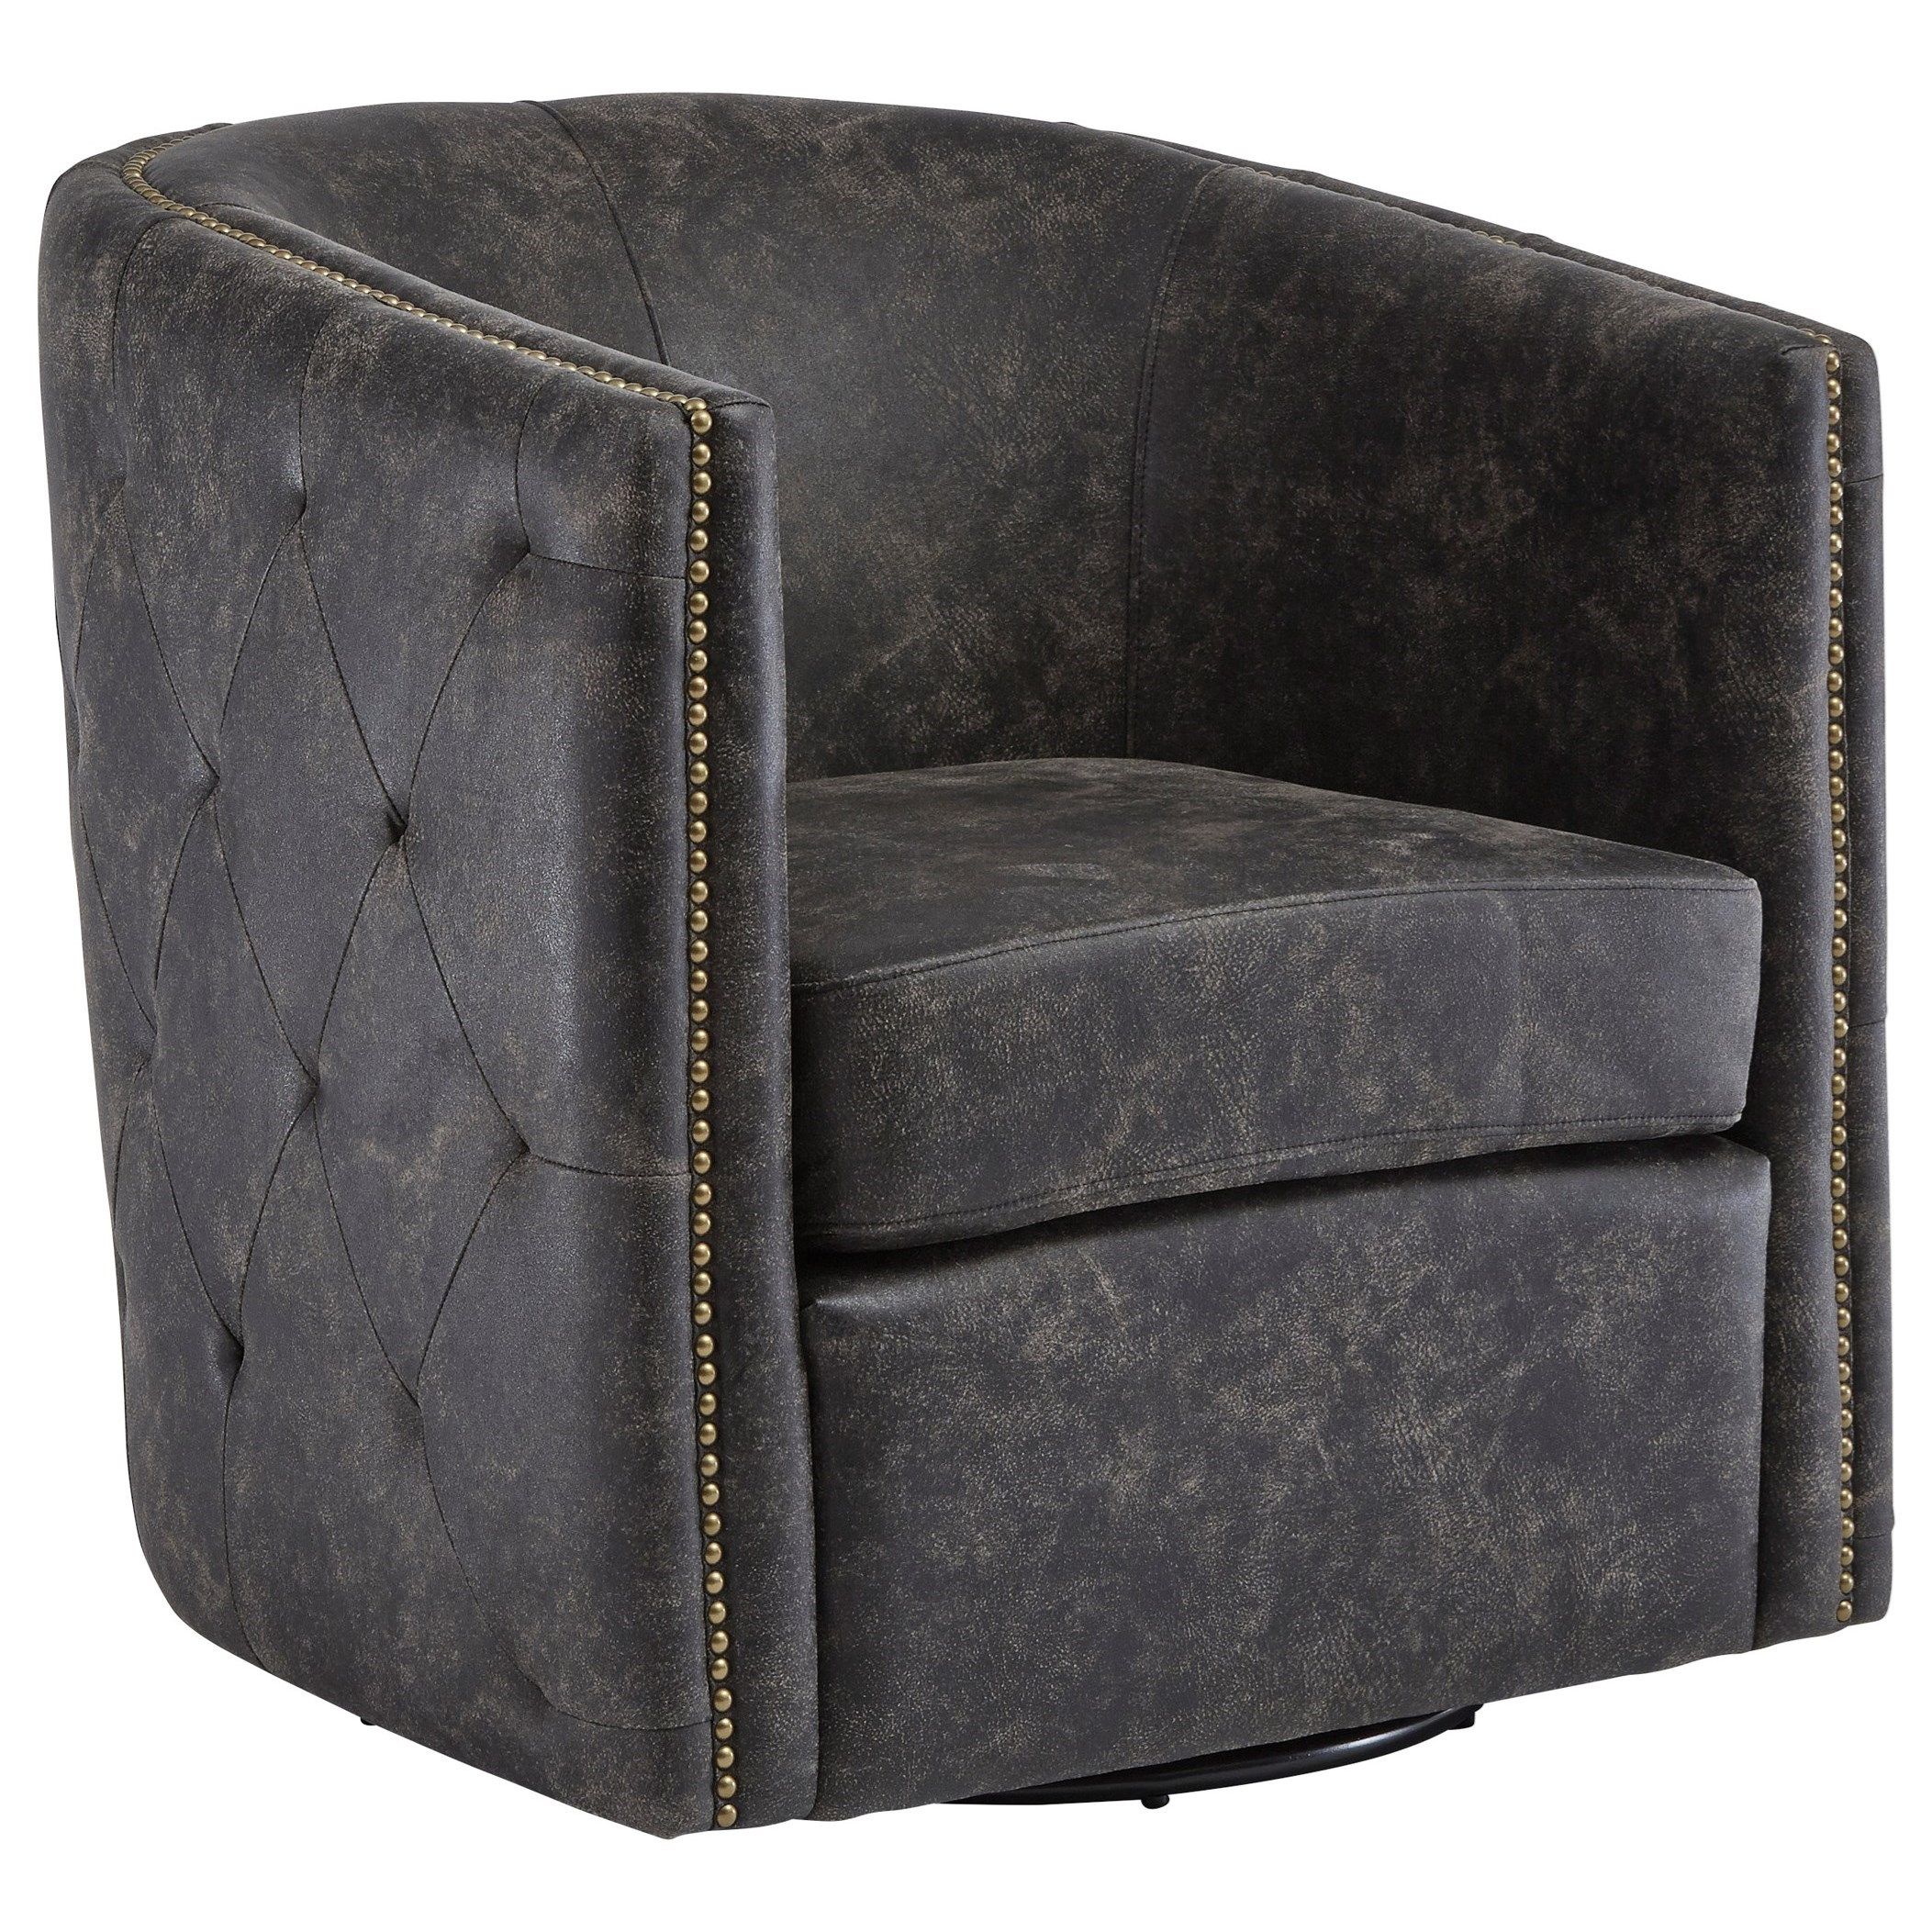 Brentlow Swivel Chair Intended For Faux Leather Barrel Chairs (View 10 of 15)